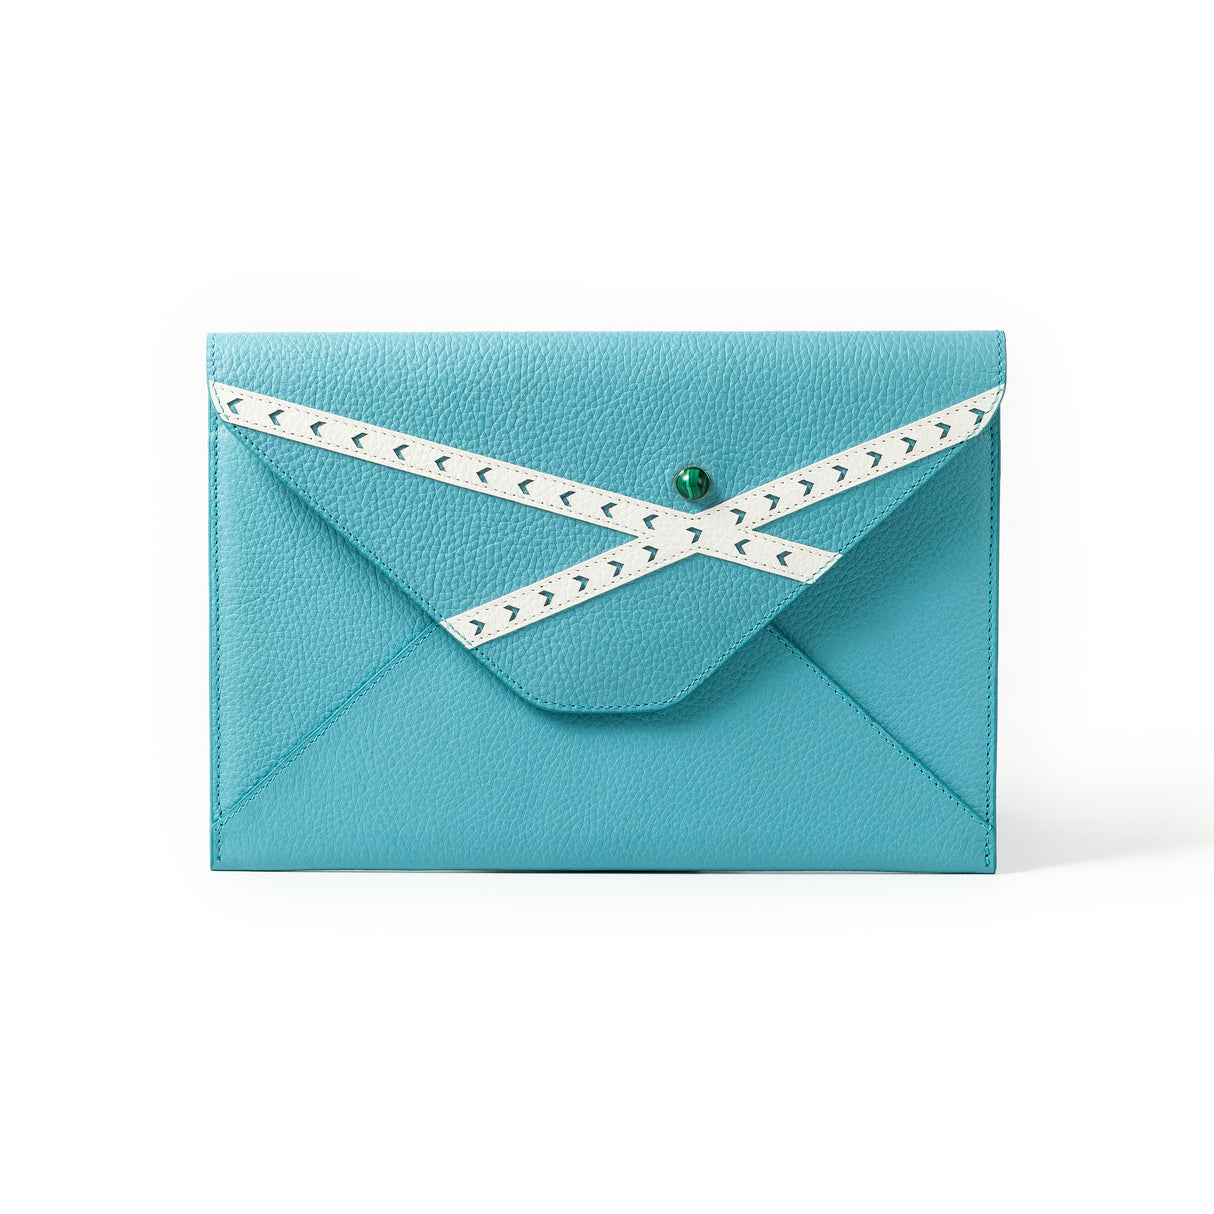 The Crossroads envelope is the perfect talisman for you to carry everywhere you go. You will be surprised how much you can fit into this beautiful envelope clutch.  100% Leather (Cork & Leather combination is also available)  Handcrafted with love, jeweled with natural malachite stone.